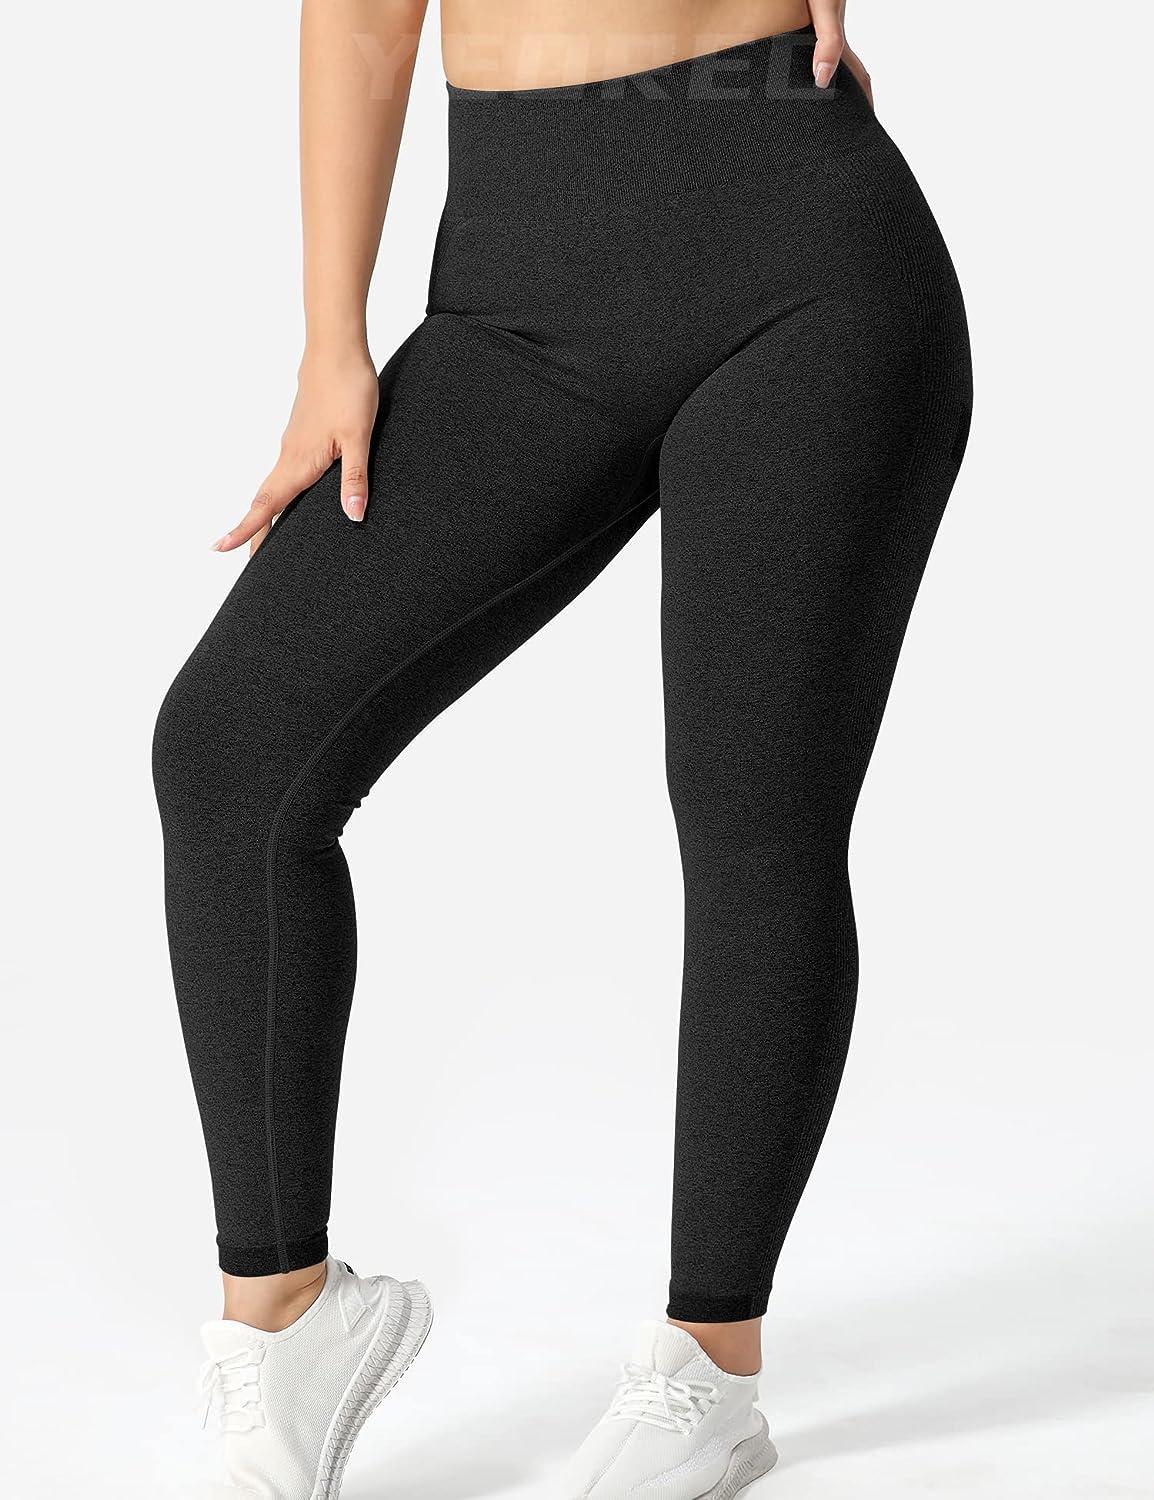 Buy YEOREO Women's Scrunch Booty Lifting Workout Leggings Seamless High  Waisted Butt Yoga Pants Slimming Tights, #0 Ruched Black, Medium at